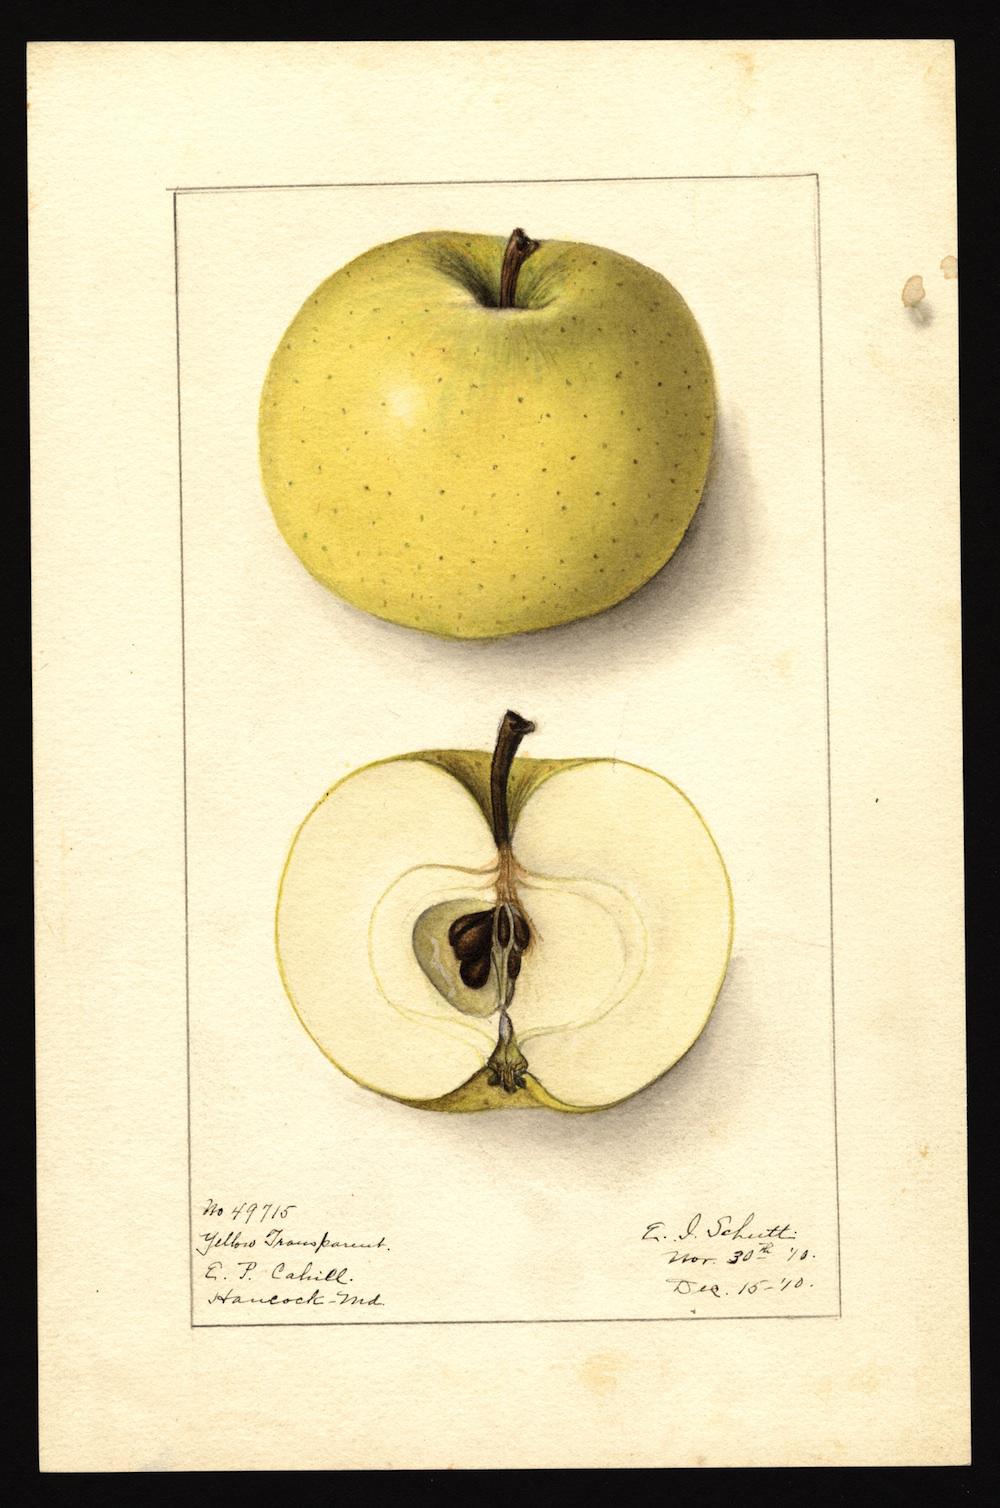 The curious early history of apples – DW – 05/31/2019